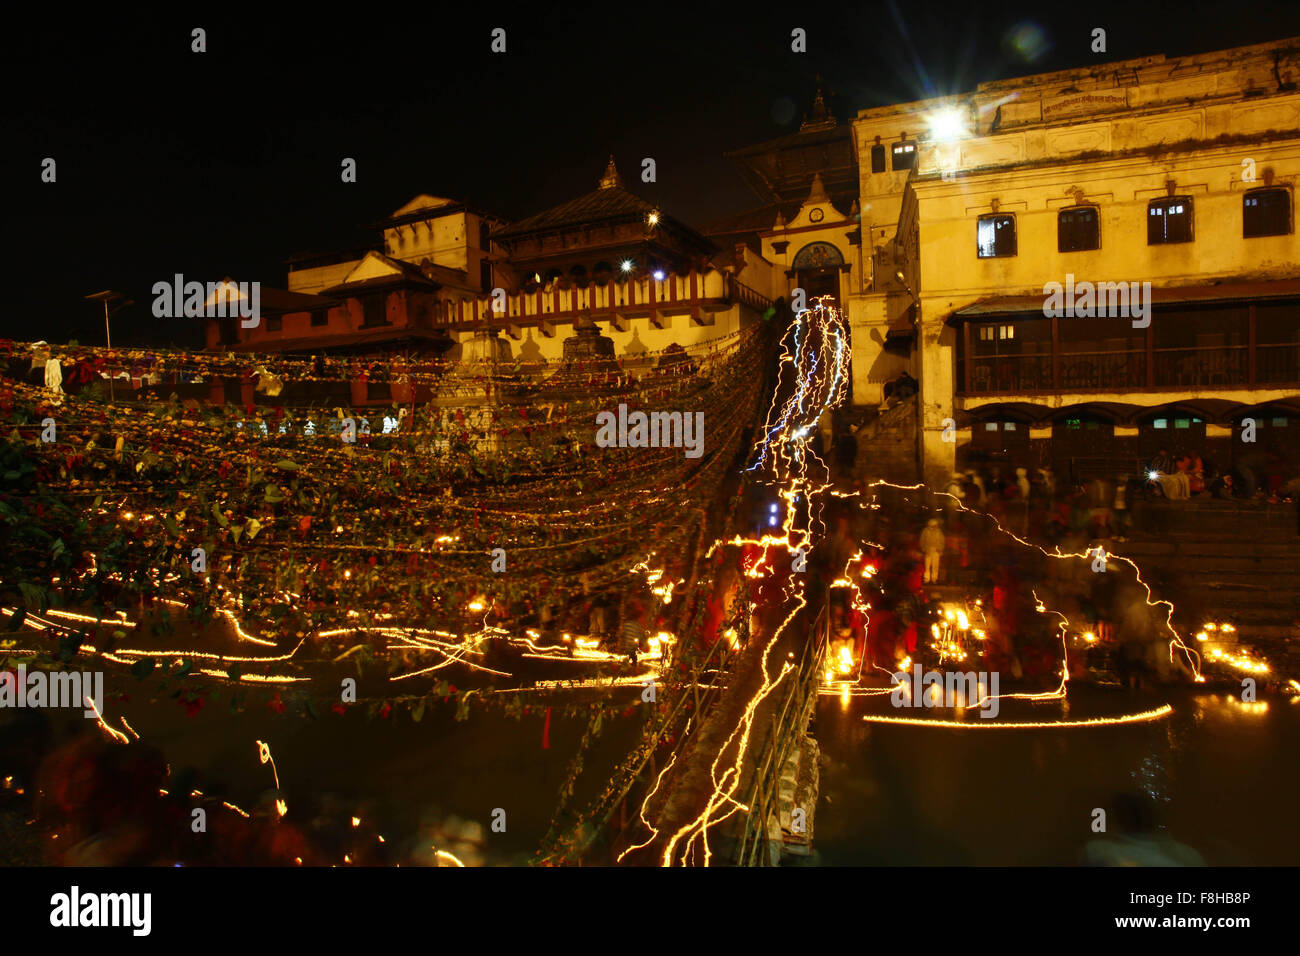 Kathmandu, Nepal. 10th Dec, 2015. Photo captured in long exposure shows Nepalese Hindu devotees carrying oil lamp to put on the Bagmati river to offer prayers during the Bala Chaturdashi Festival in Kathmandu, Nepal, Dec. 10, 2015. On this day, worshippers scatter seven types of grain known as 'Sat biu' honouring the departed along a route at the temple. © Pratap Thapa/Xinhua/Alamy Live News Stock Photo